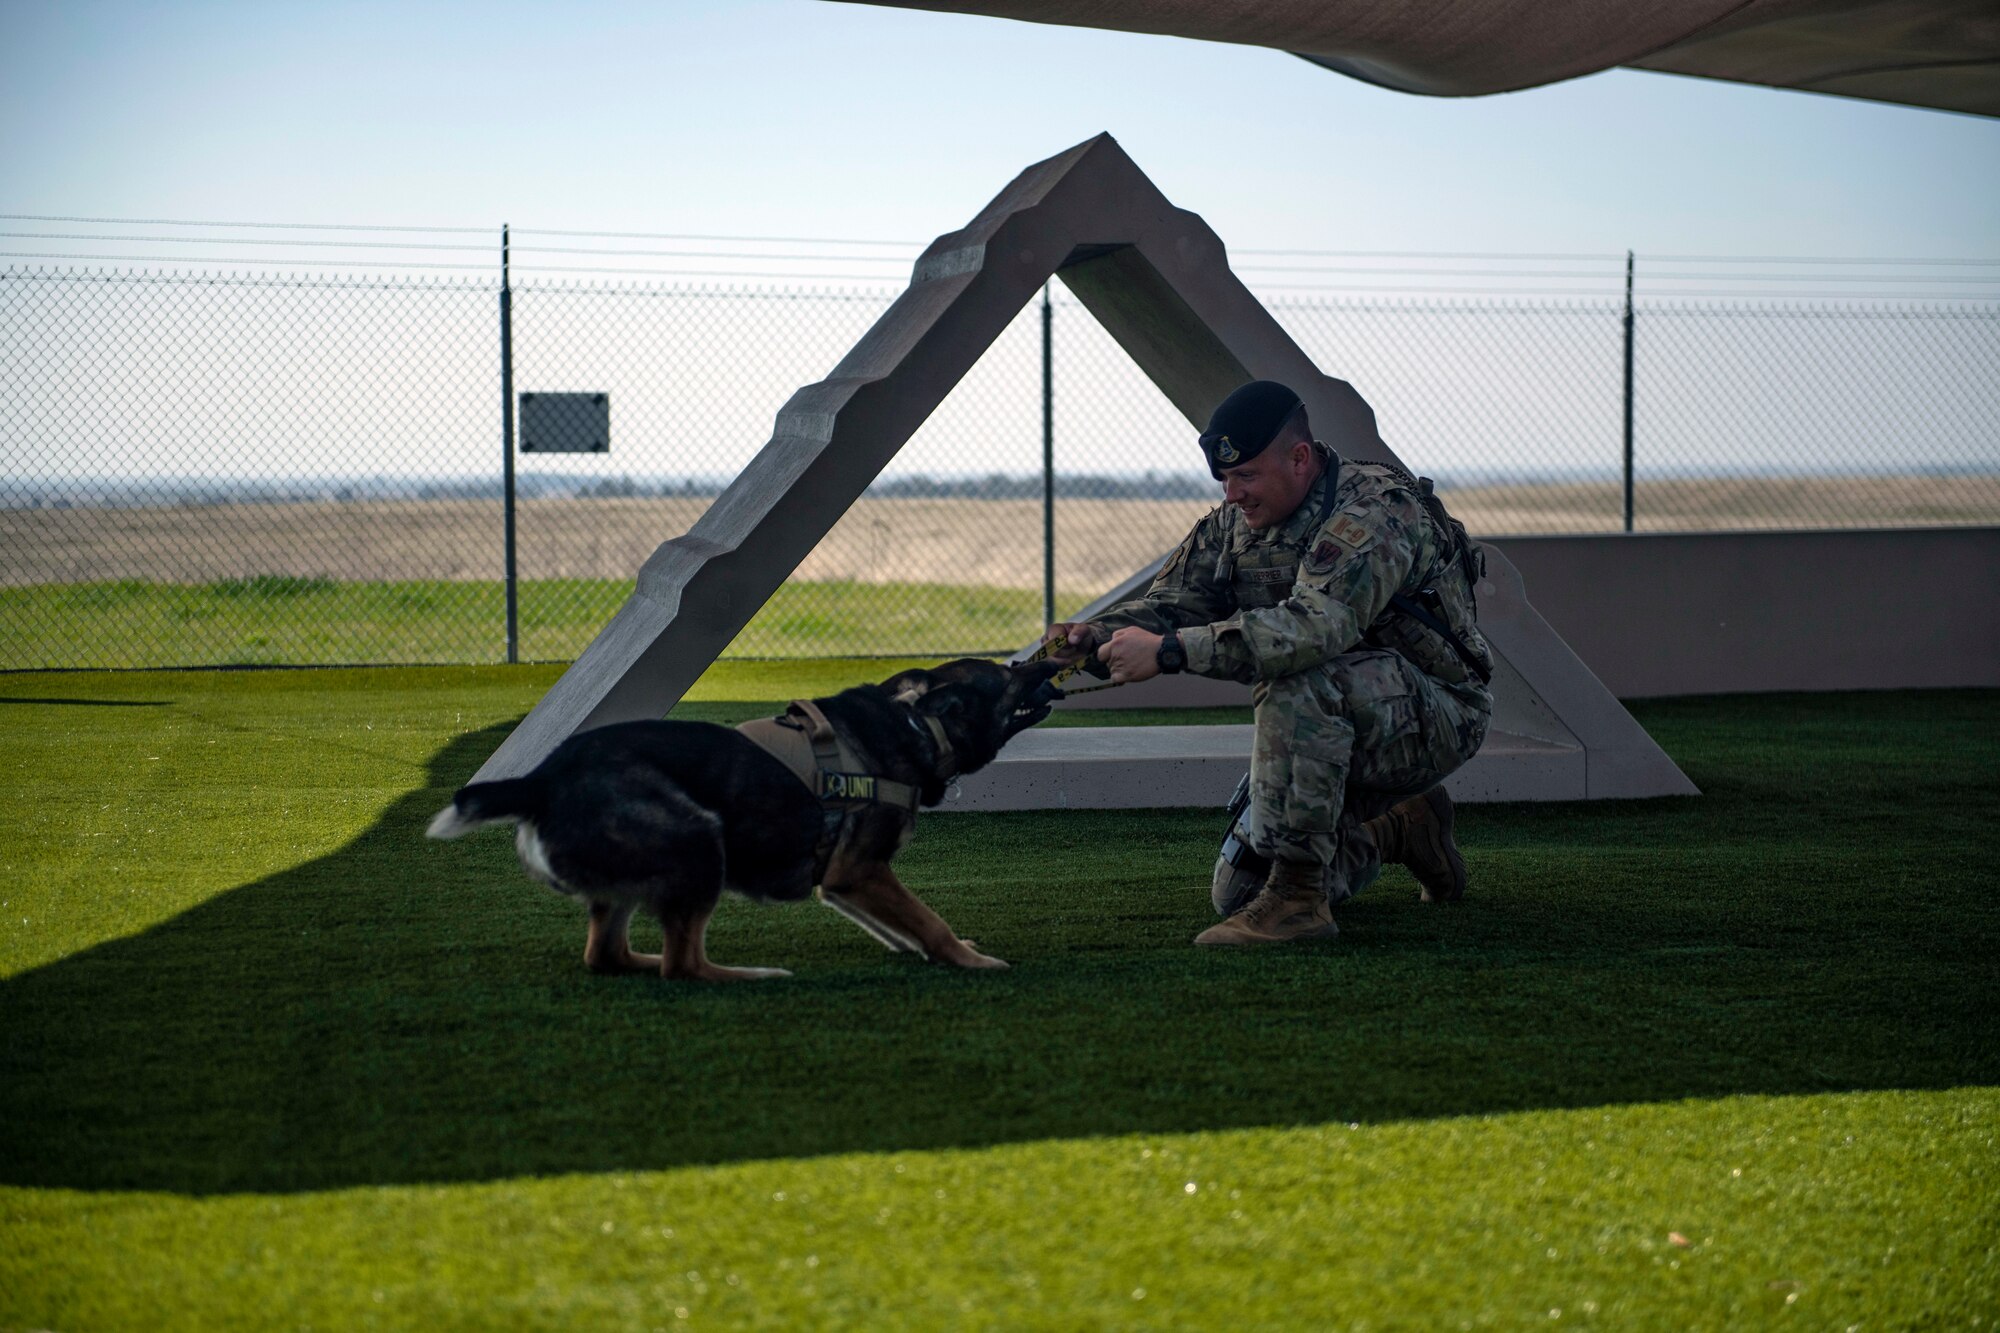 Staff Sgt. Jason Herrier, 9th Security Forces Squadron (SFS) military working dog (MWD) handler and Bady 2, 9th SFS MWD play together on Beale Air Force Base.